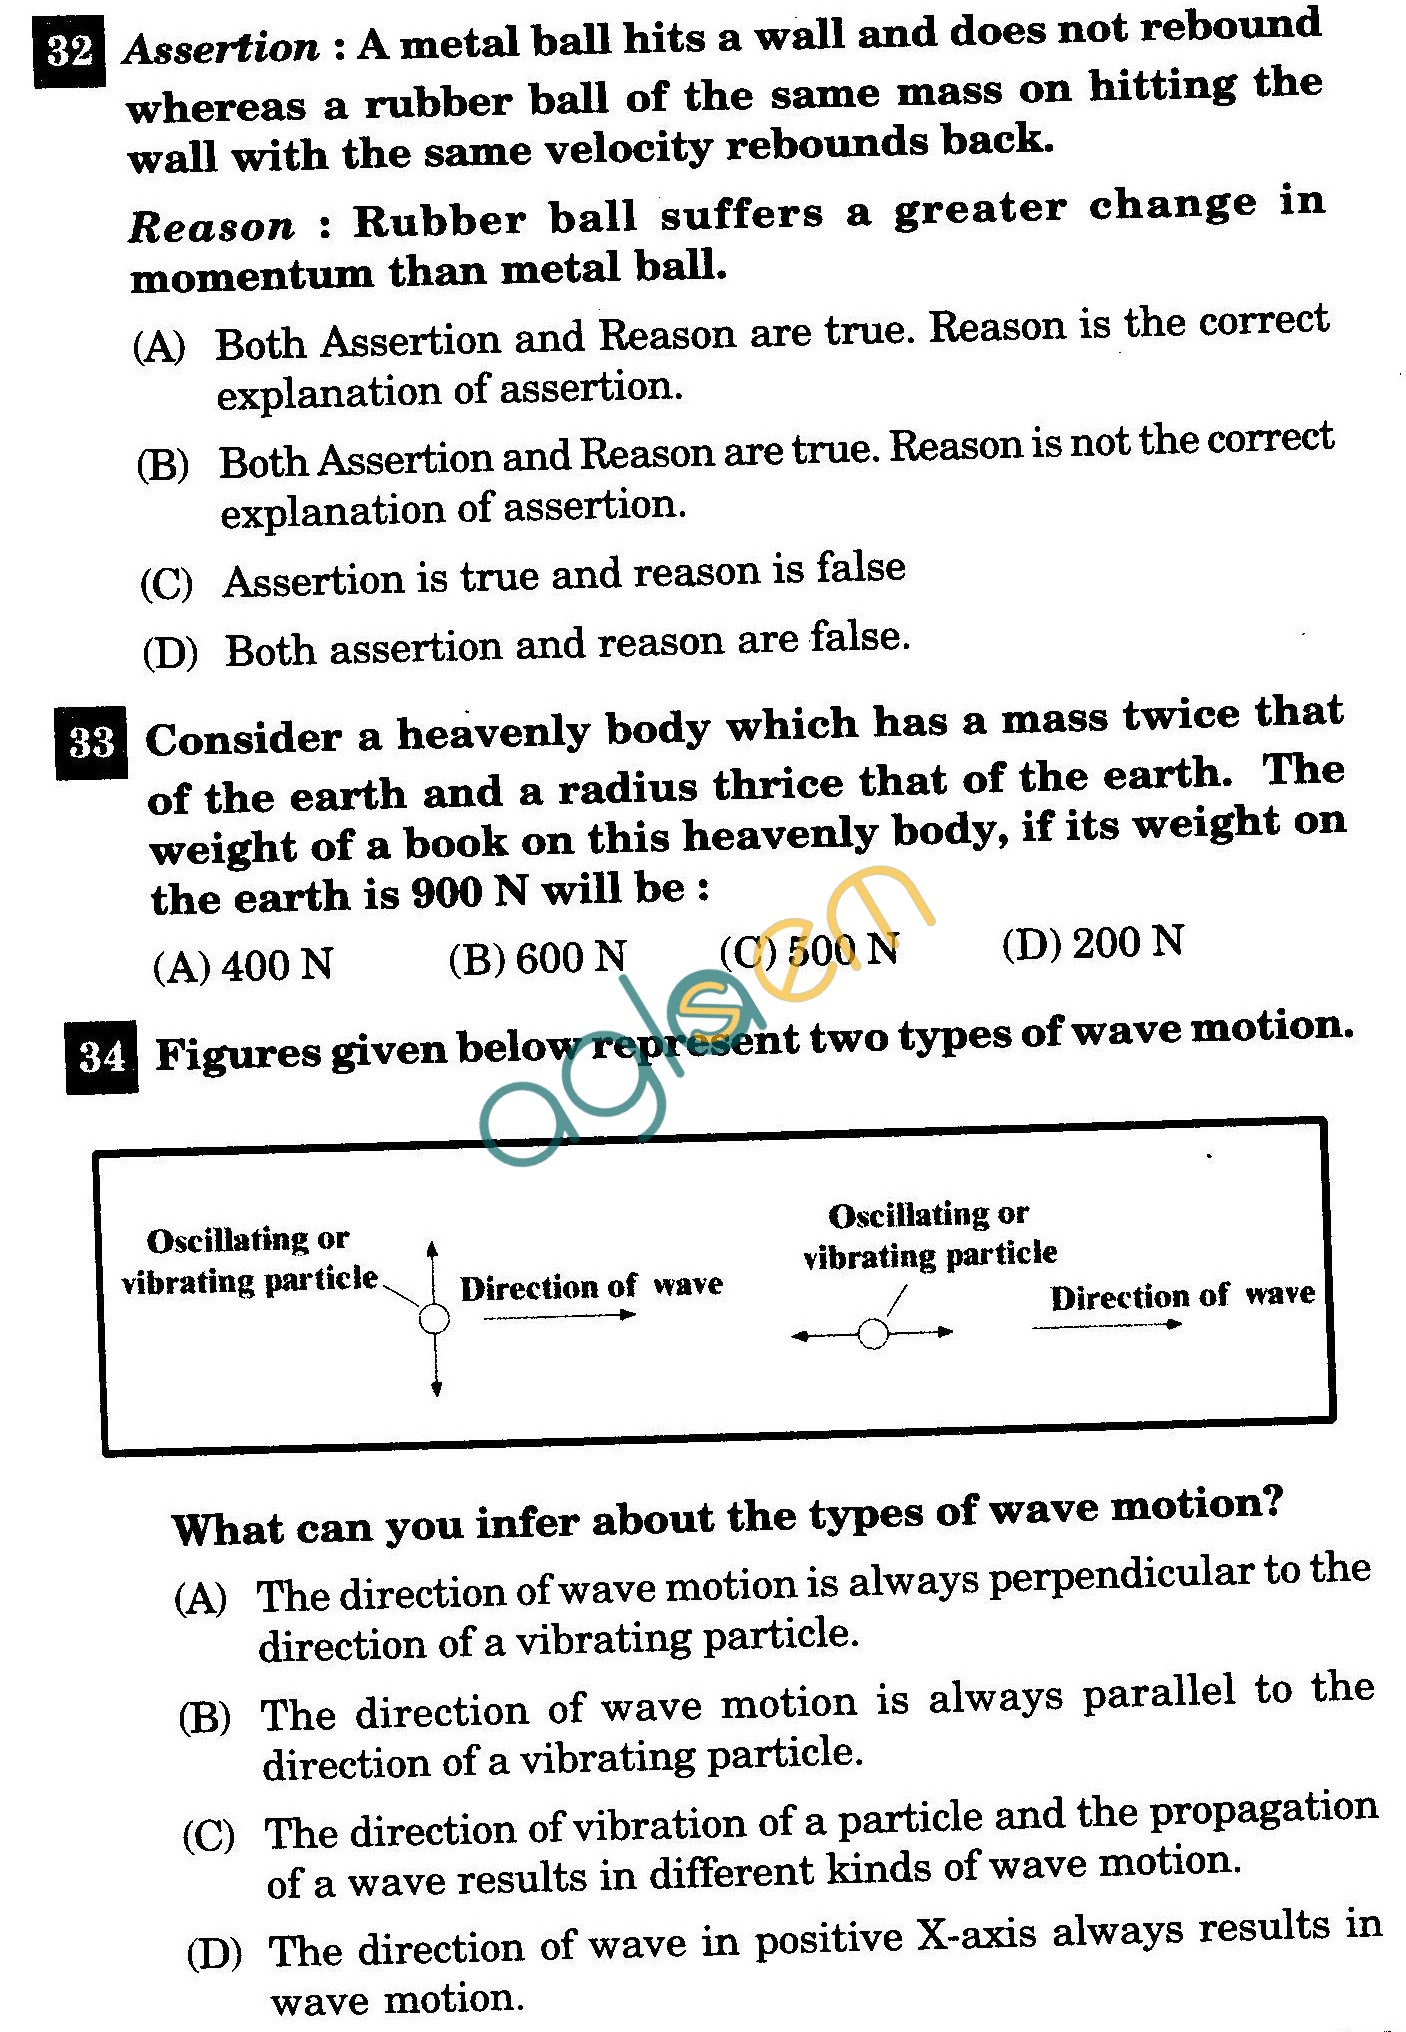 NSTSE 2011 Class IX Question Paper with Answers - Physics